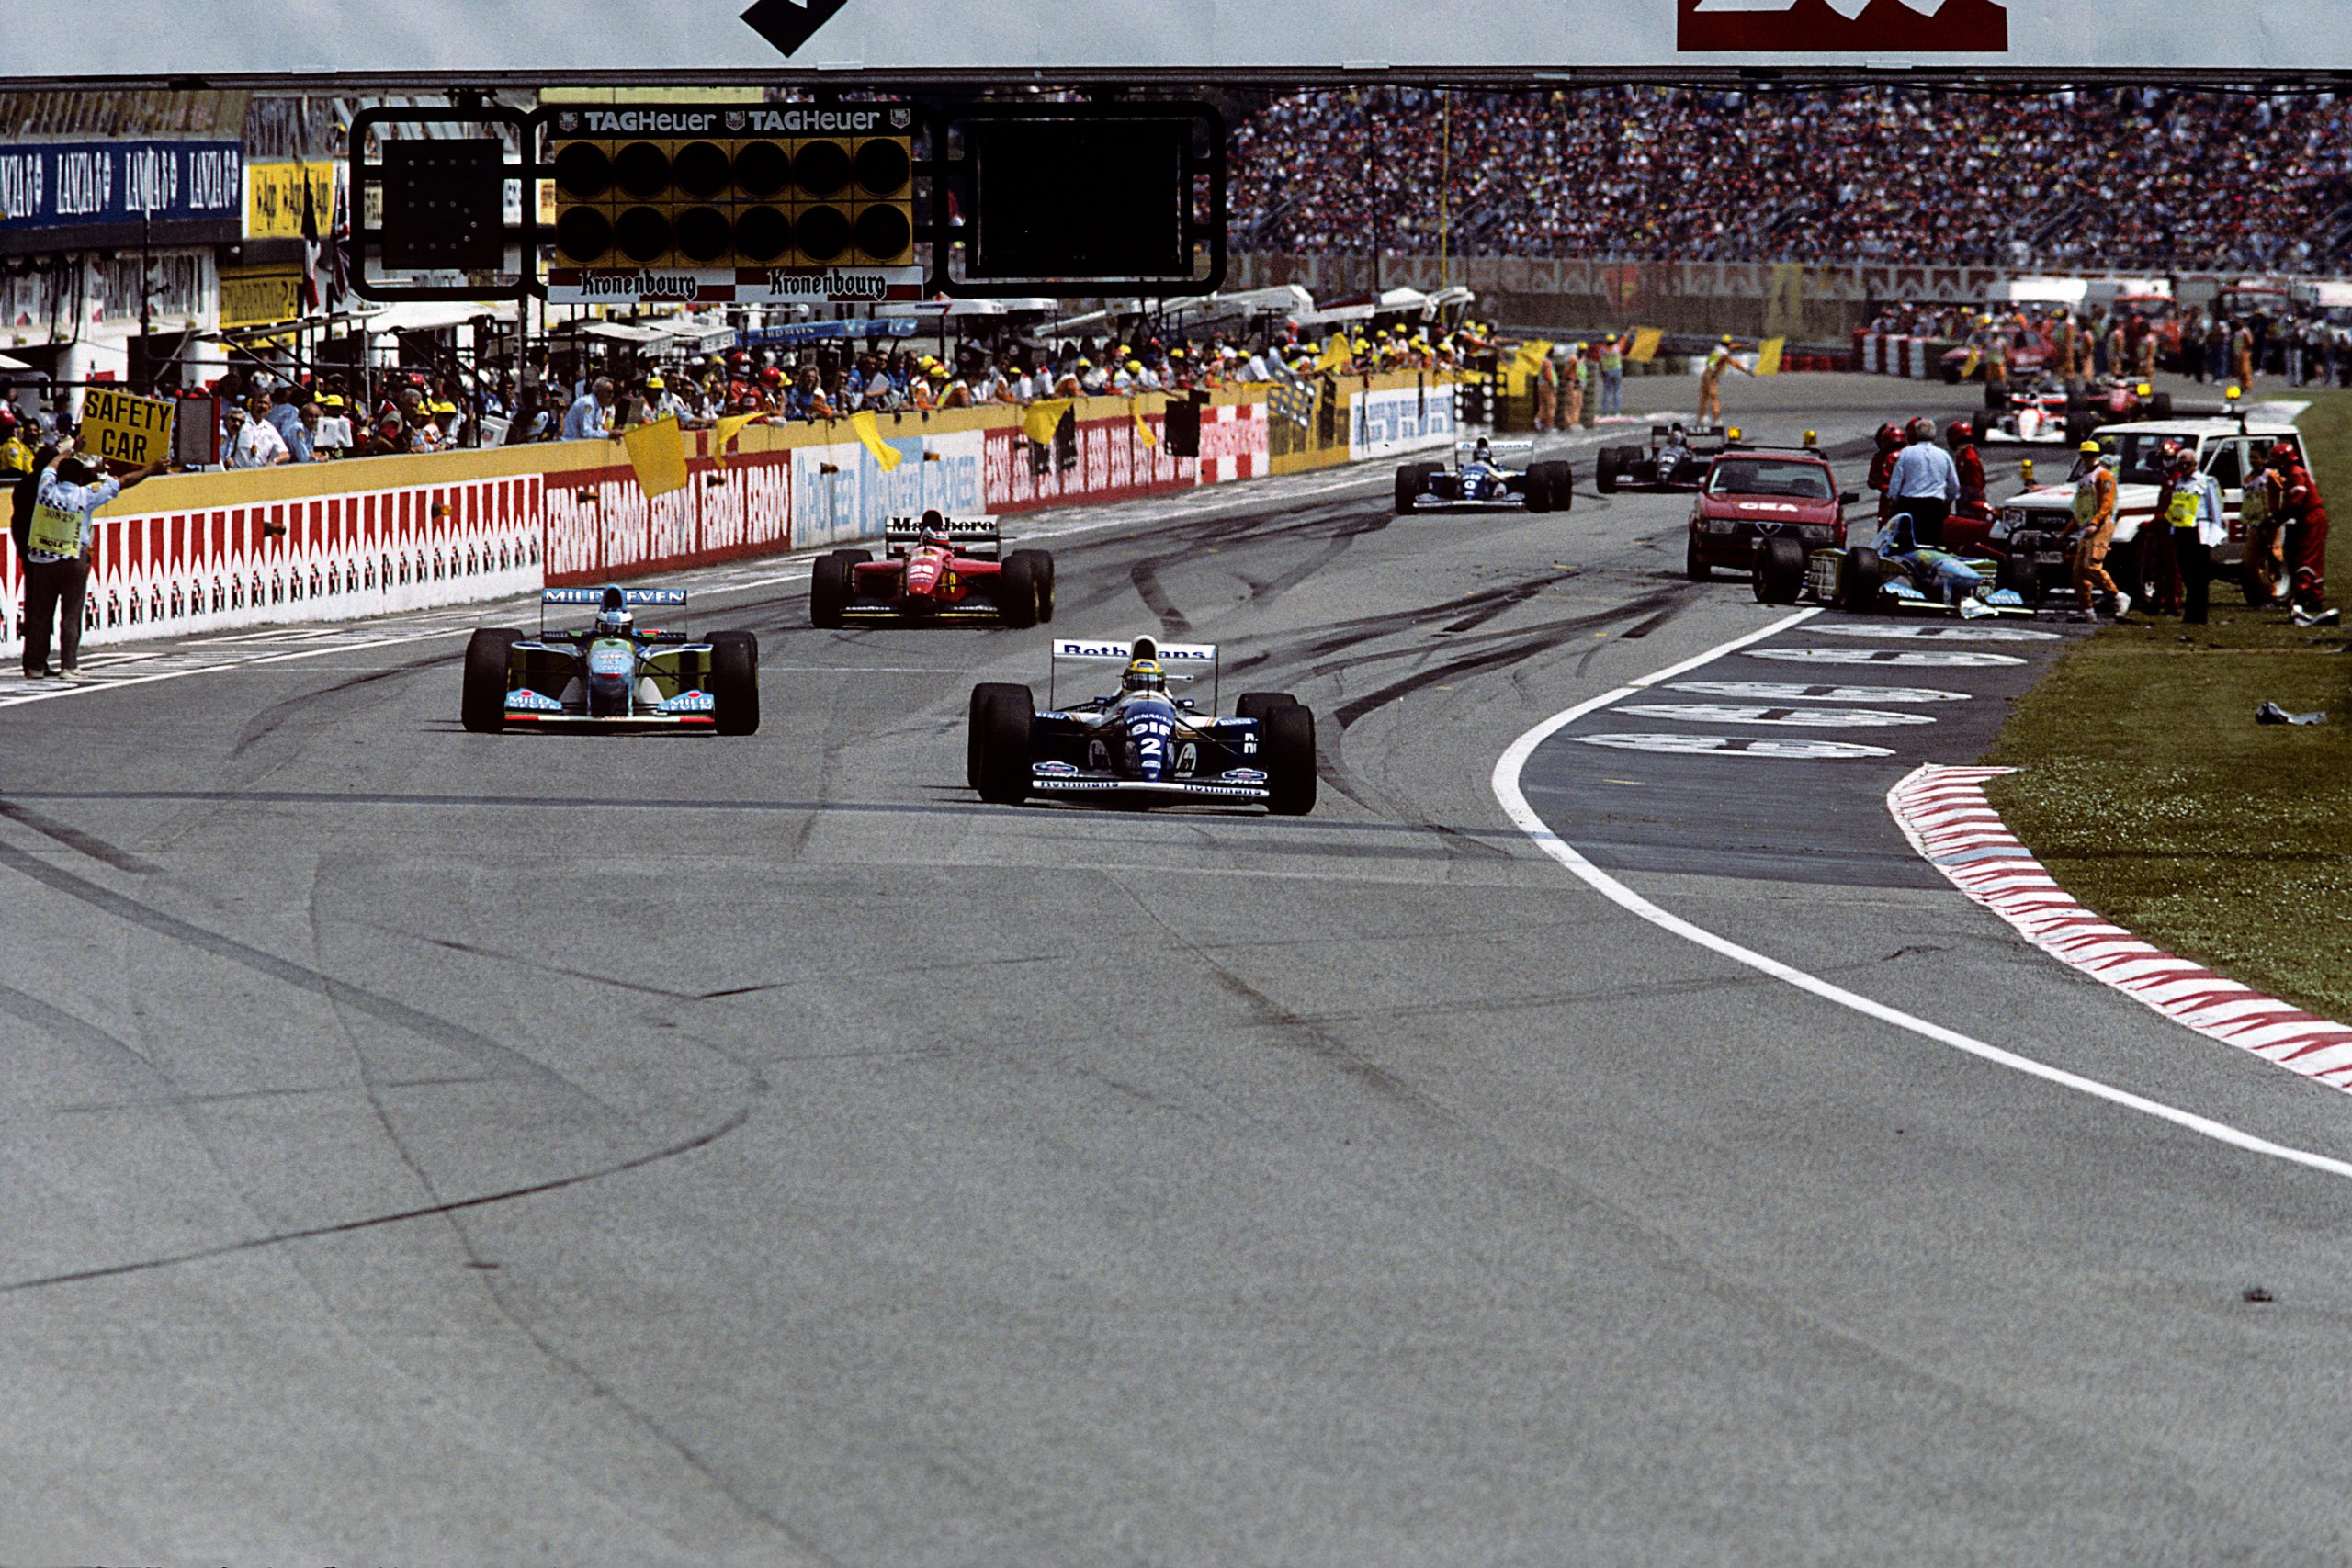 Ayrton Senna, Michael Schumacher, Gerhard Berger, Williams-Renault FW16, Benetton-Ford B194, Ferrari 412T1, Grand Prix of San Marino, Autodromo Enzo e Dino Ferrari, Imola, 01 May 1994. End of the first lap of the 1994 San Marino Grand Prix in Imola: Ayrton Senna ahead of Michael Schumacher under yellow flag and Safety car, with JJ Lehto's Benetton, which stalled and crashed at the start, visible on the right. (Photo by Paul-Henri Cahier/Getty Images)